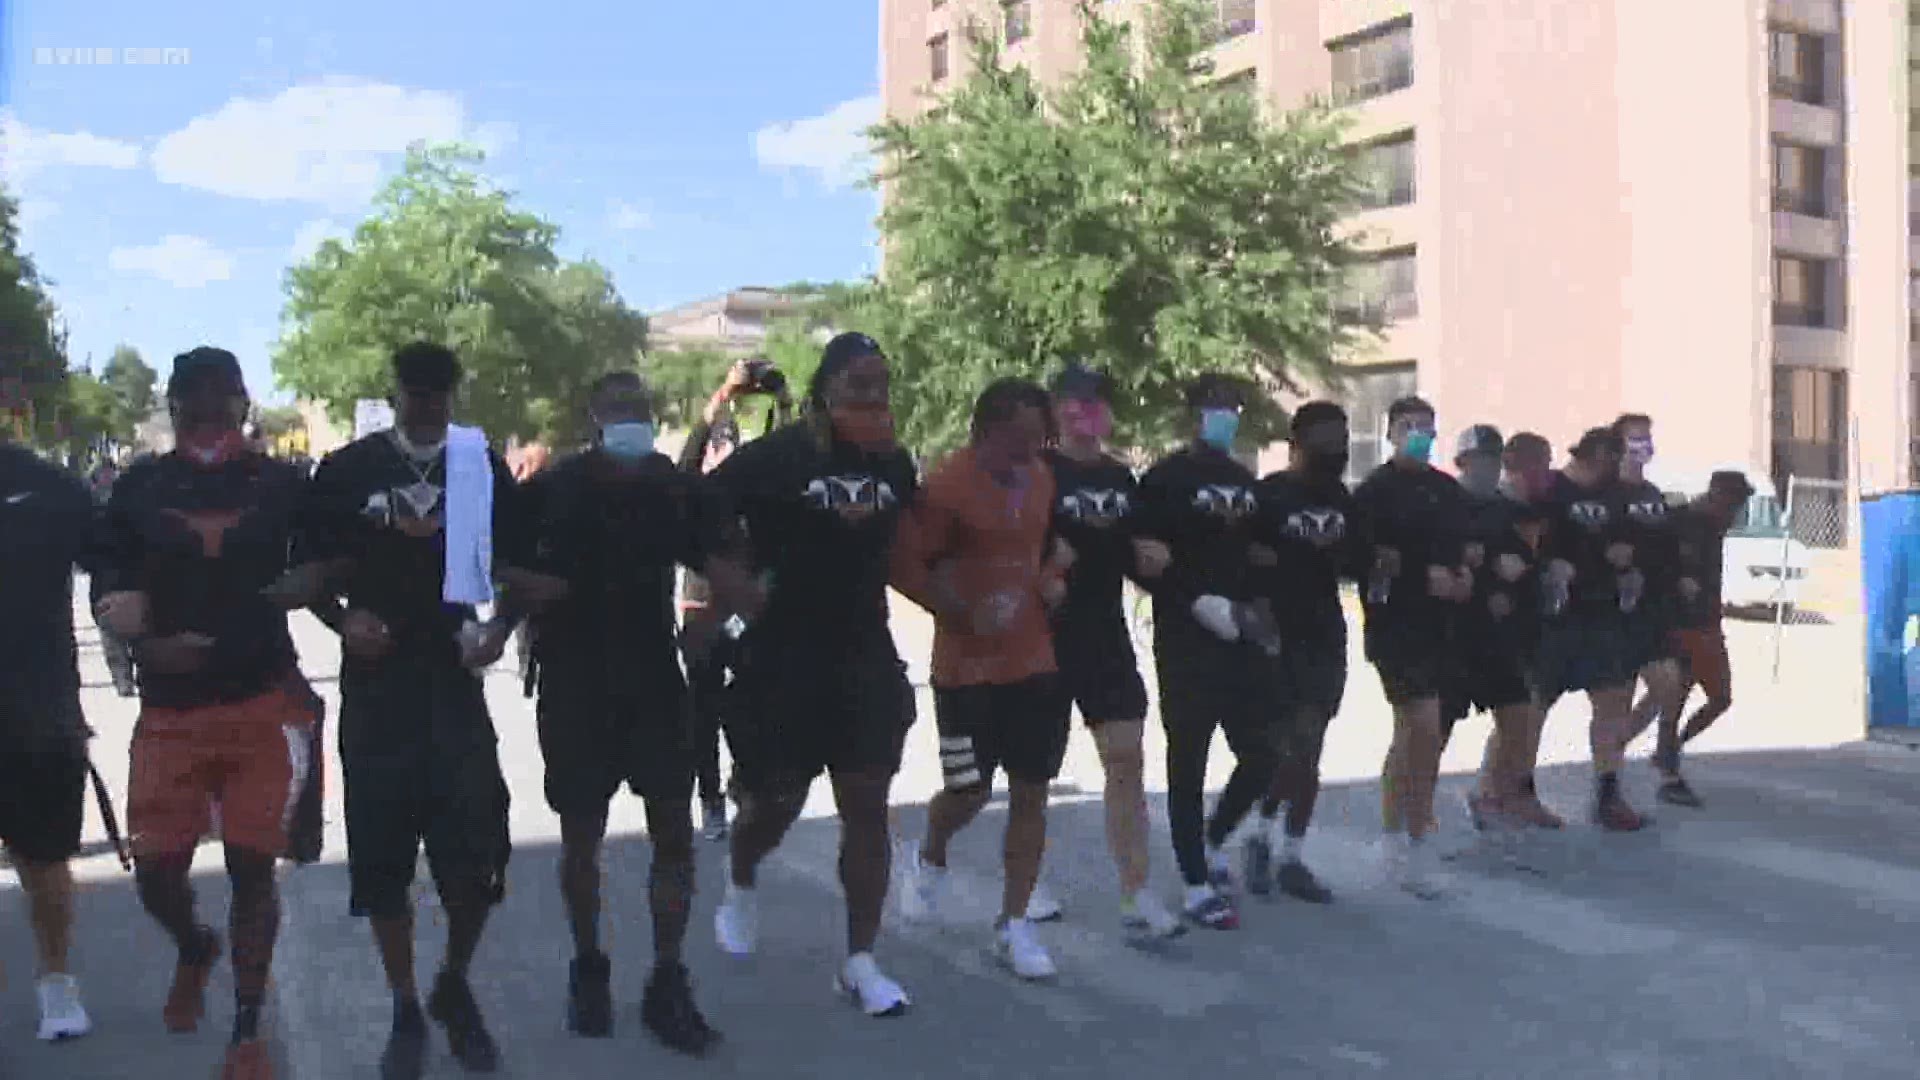 The Texas Longhorns are looking to use their platforms to insight change in the community.